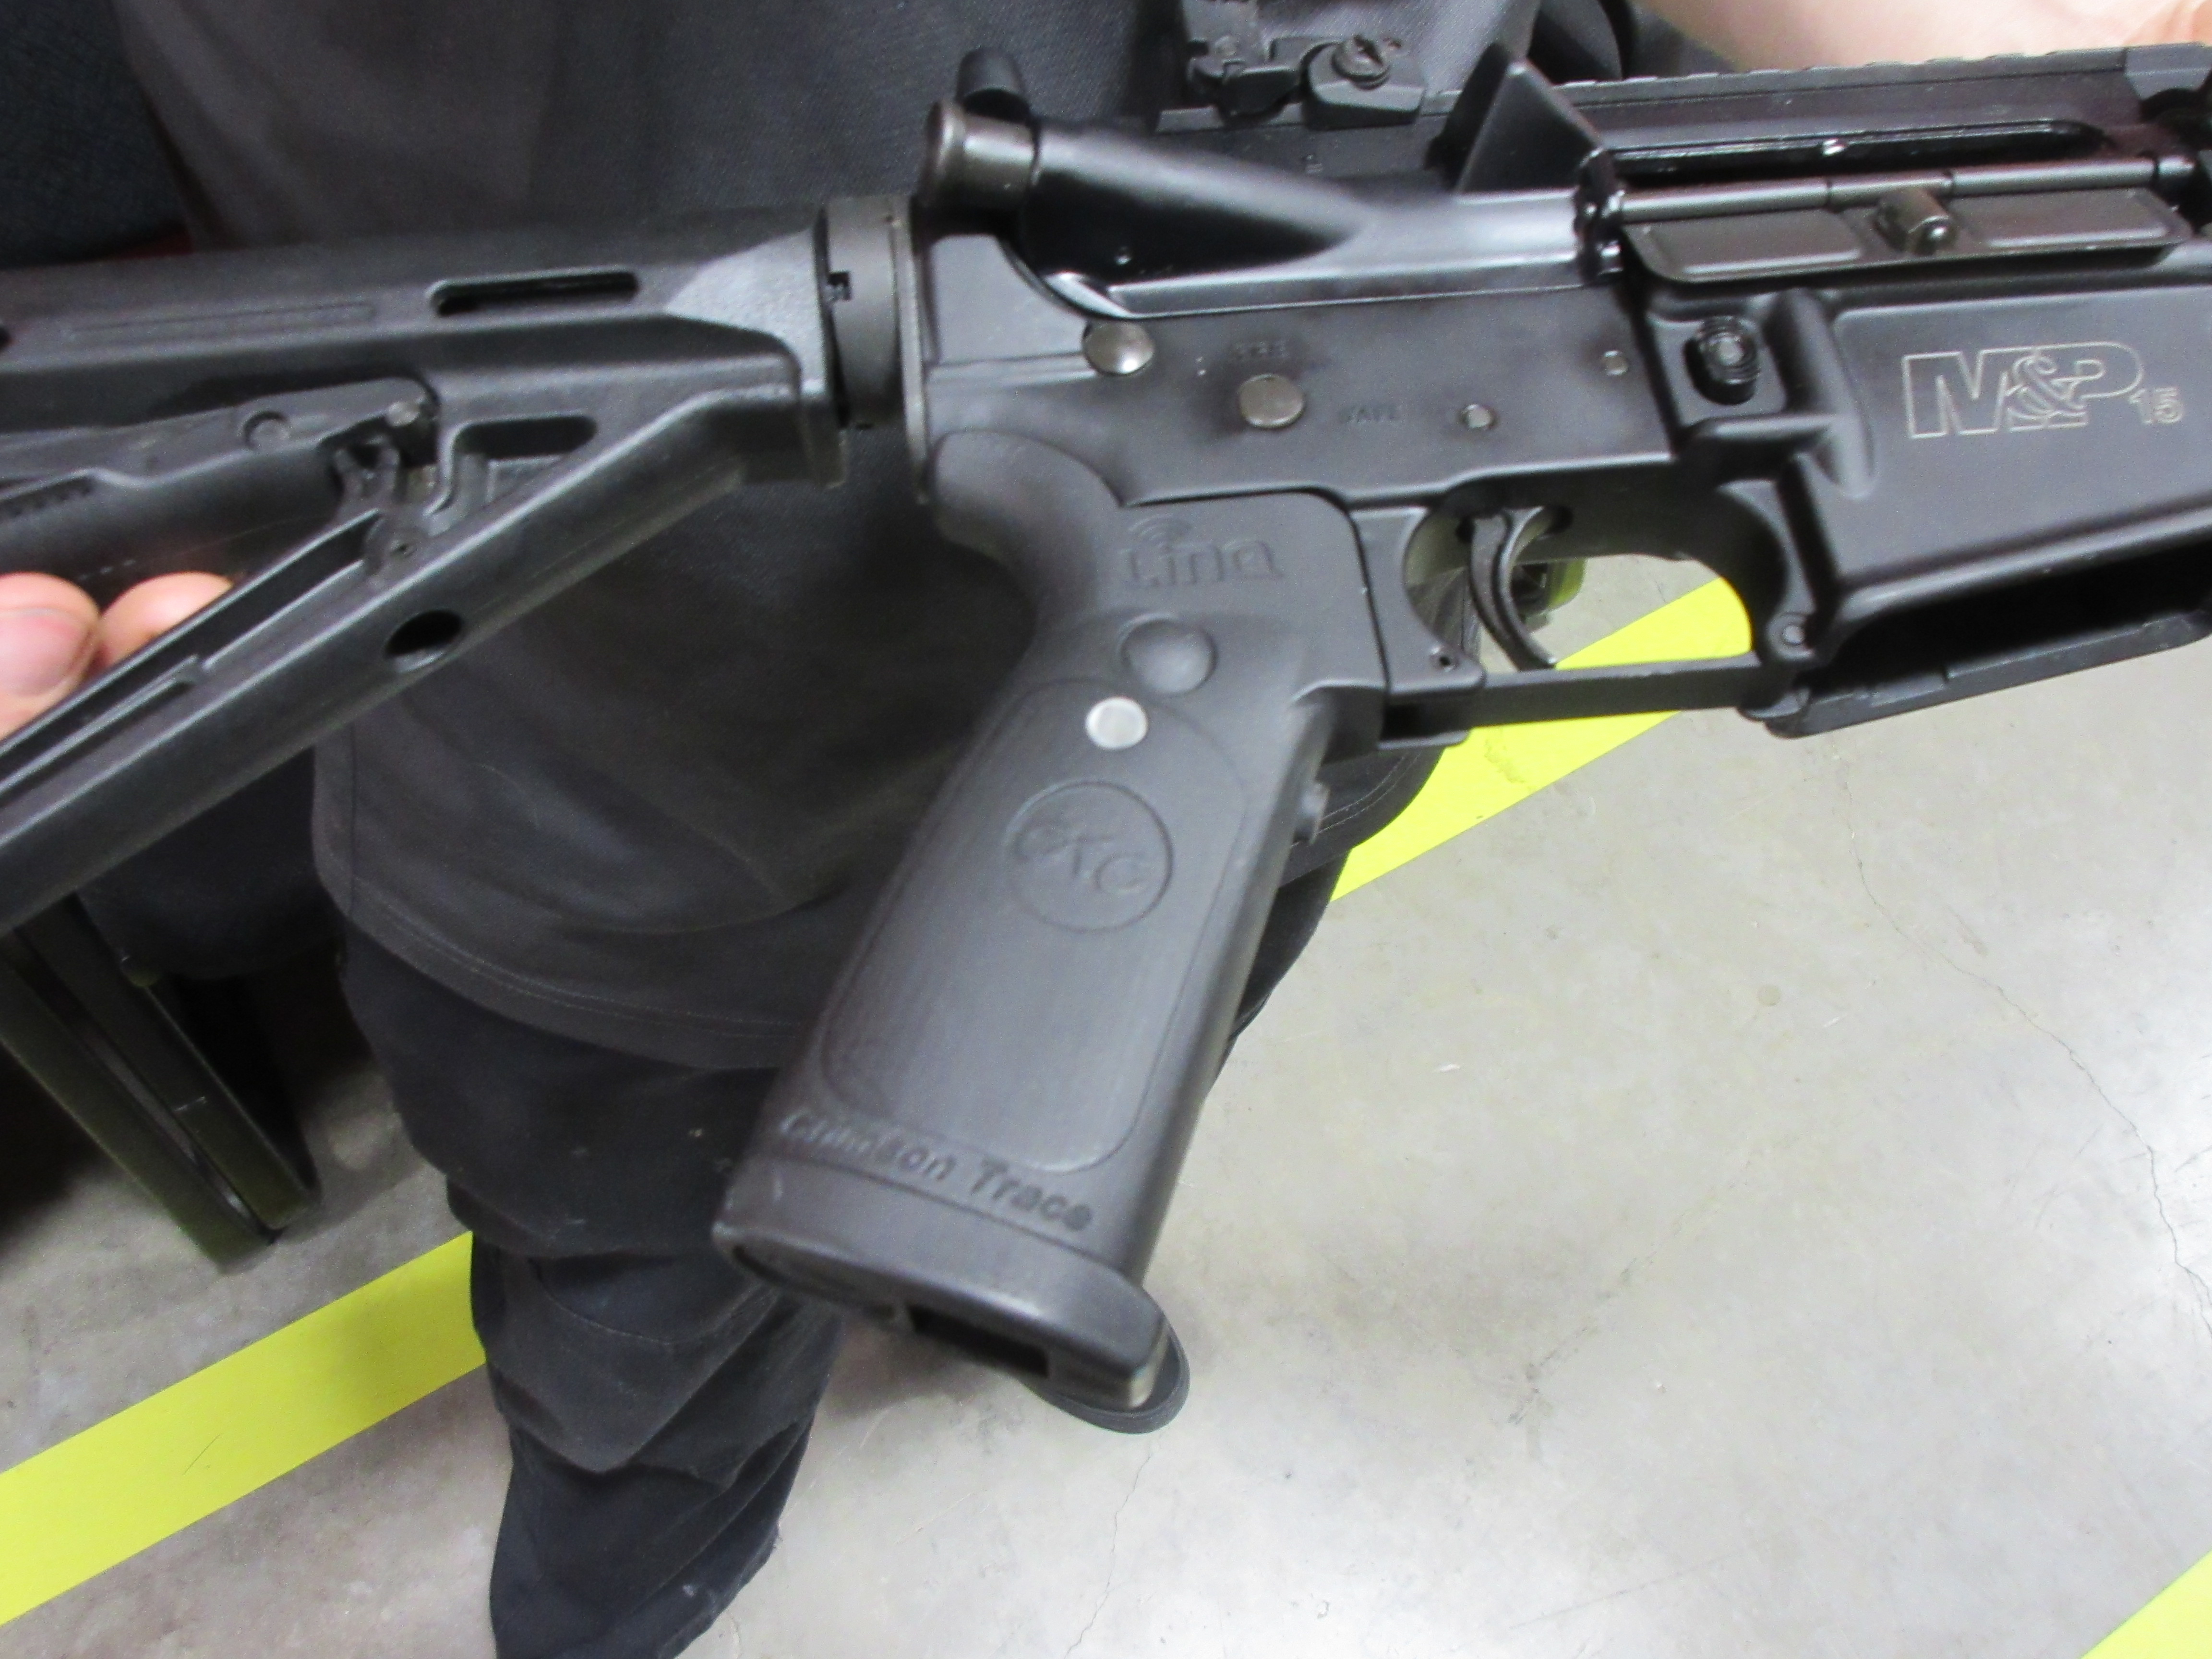 Operating controls of the Crimson Trace LinQ are on the pistol grip for instinctive activation.